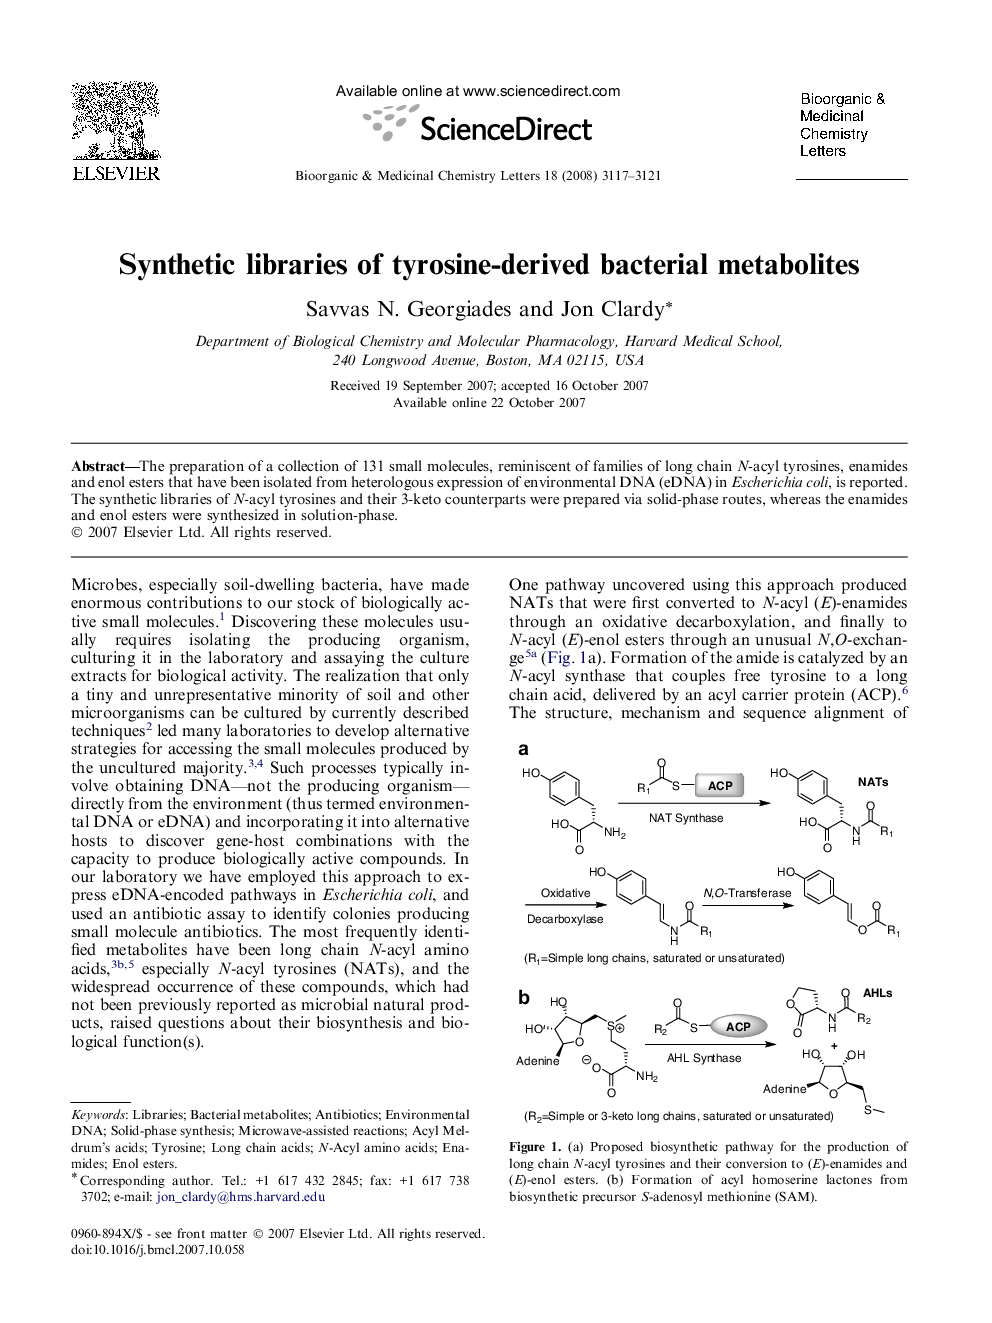 Synthetic libraries of tyrosine-derived bacterial metabolites